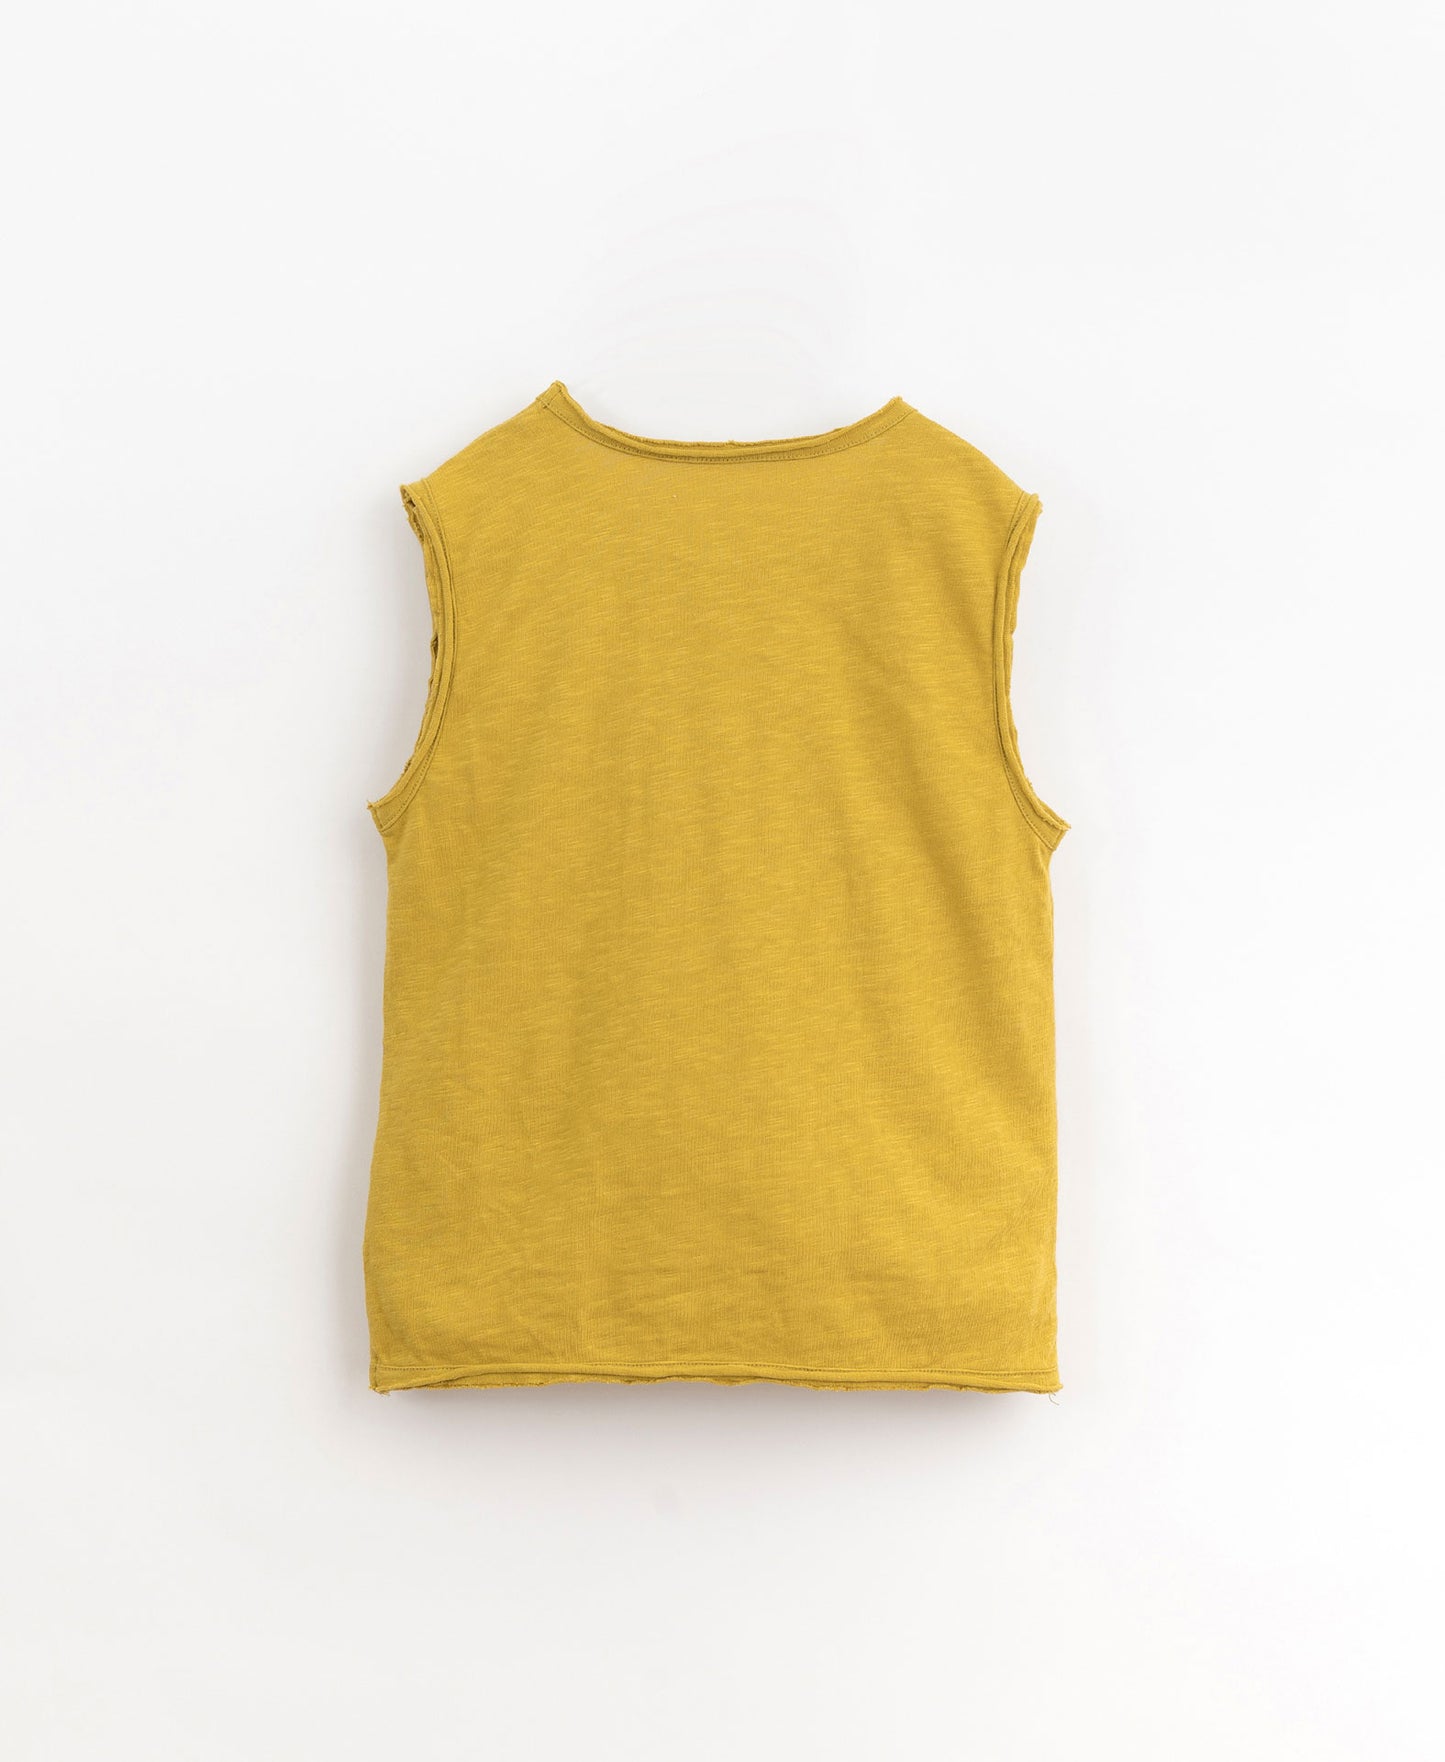 Sleeveless T-shirt with shoulder opening - mustard